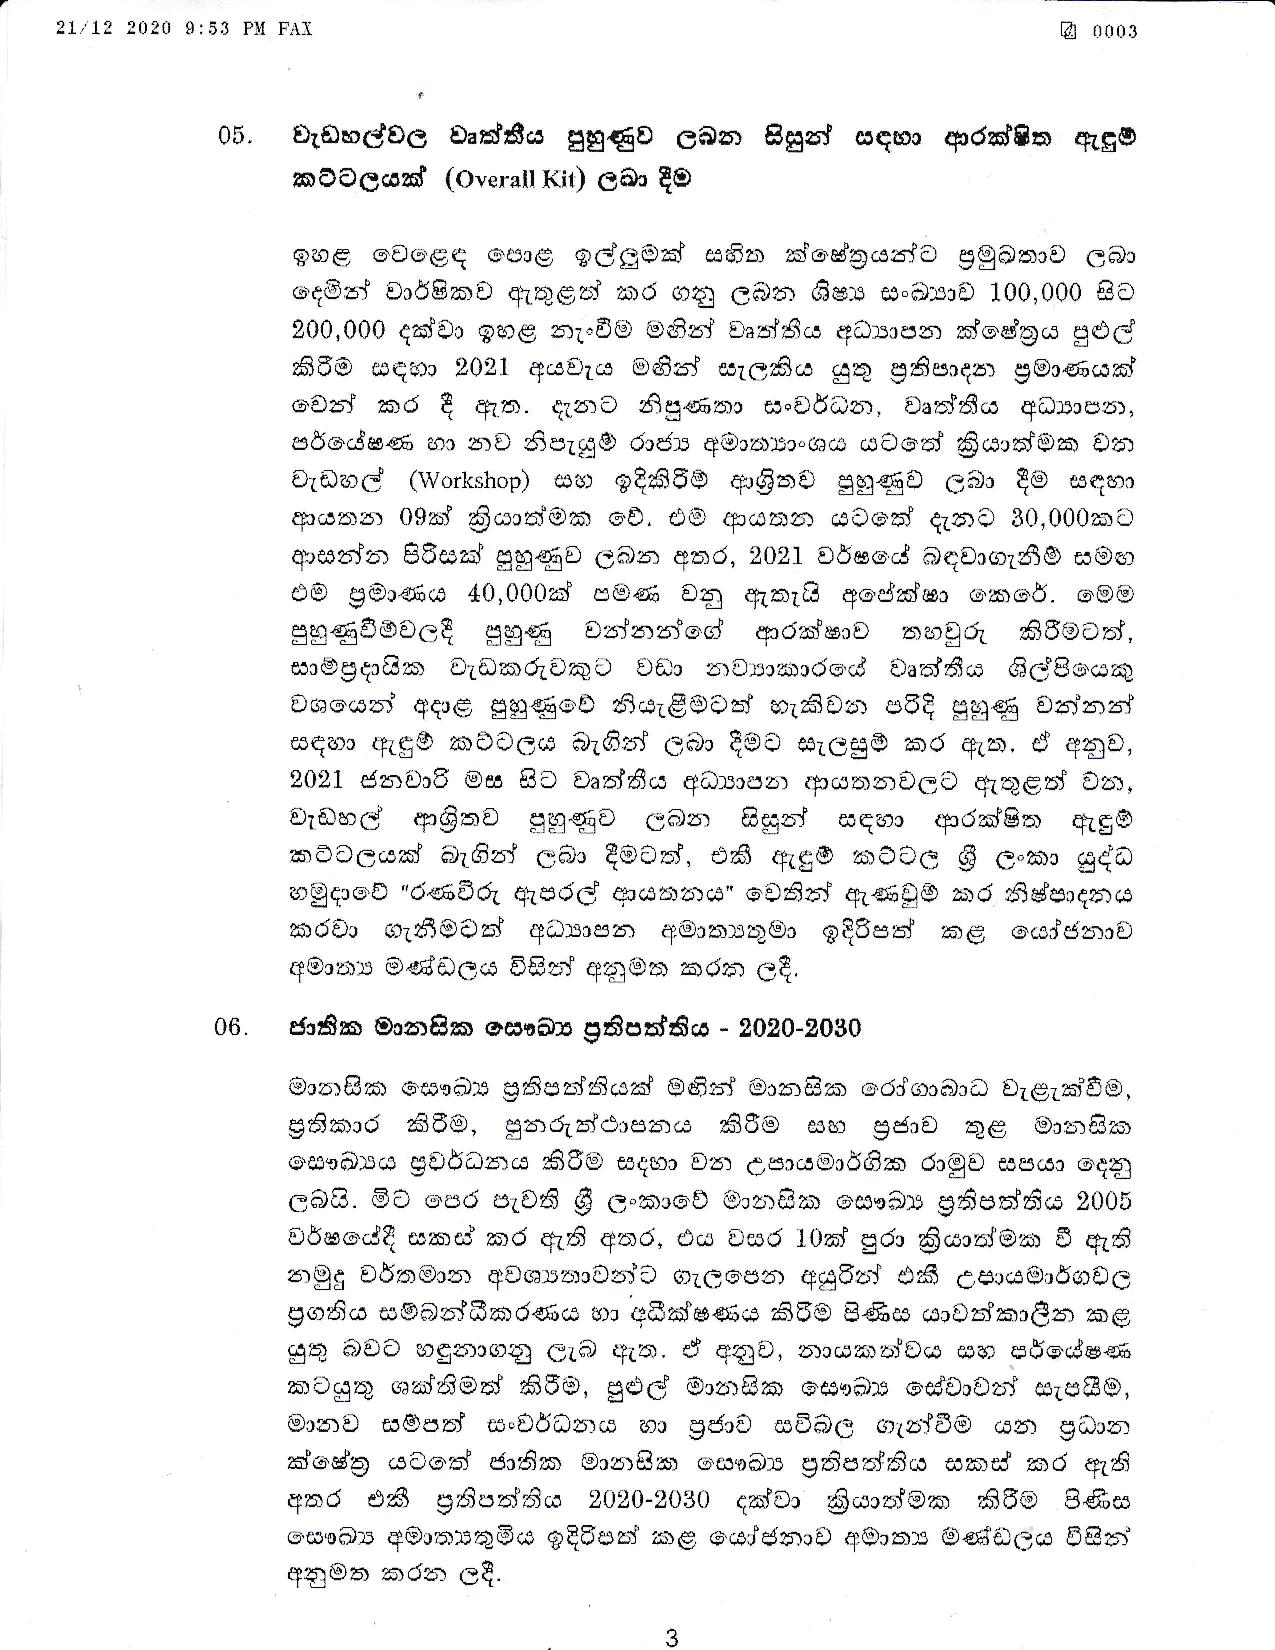 Cabinet Decision on 21.12.2020 page 003